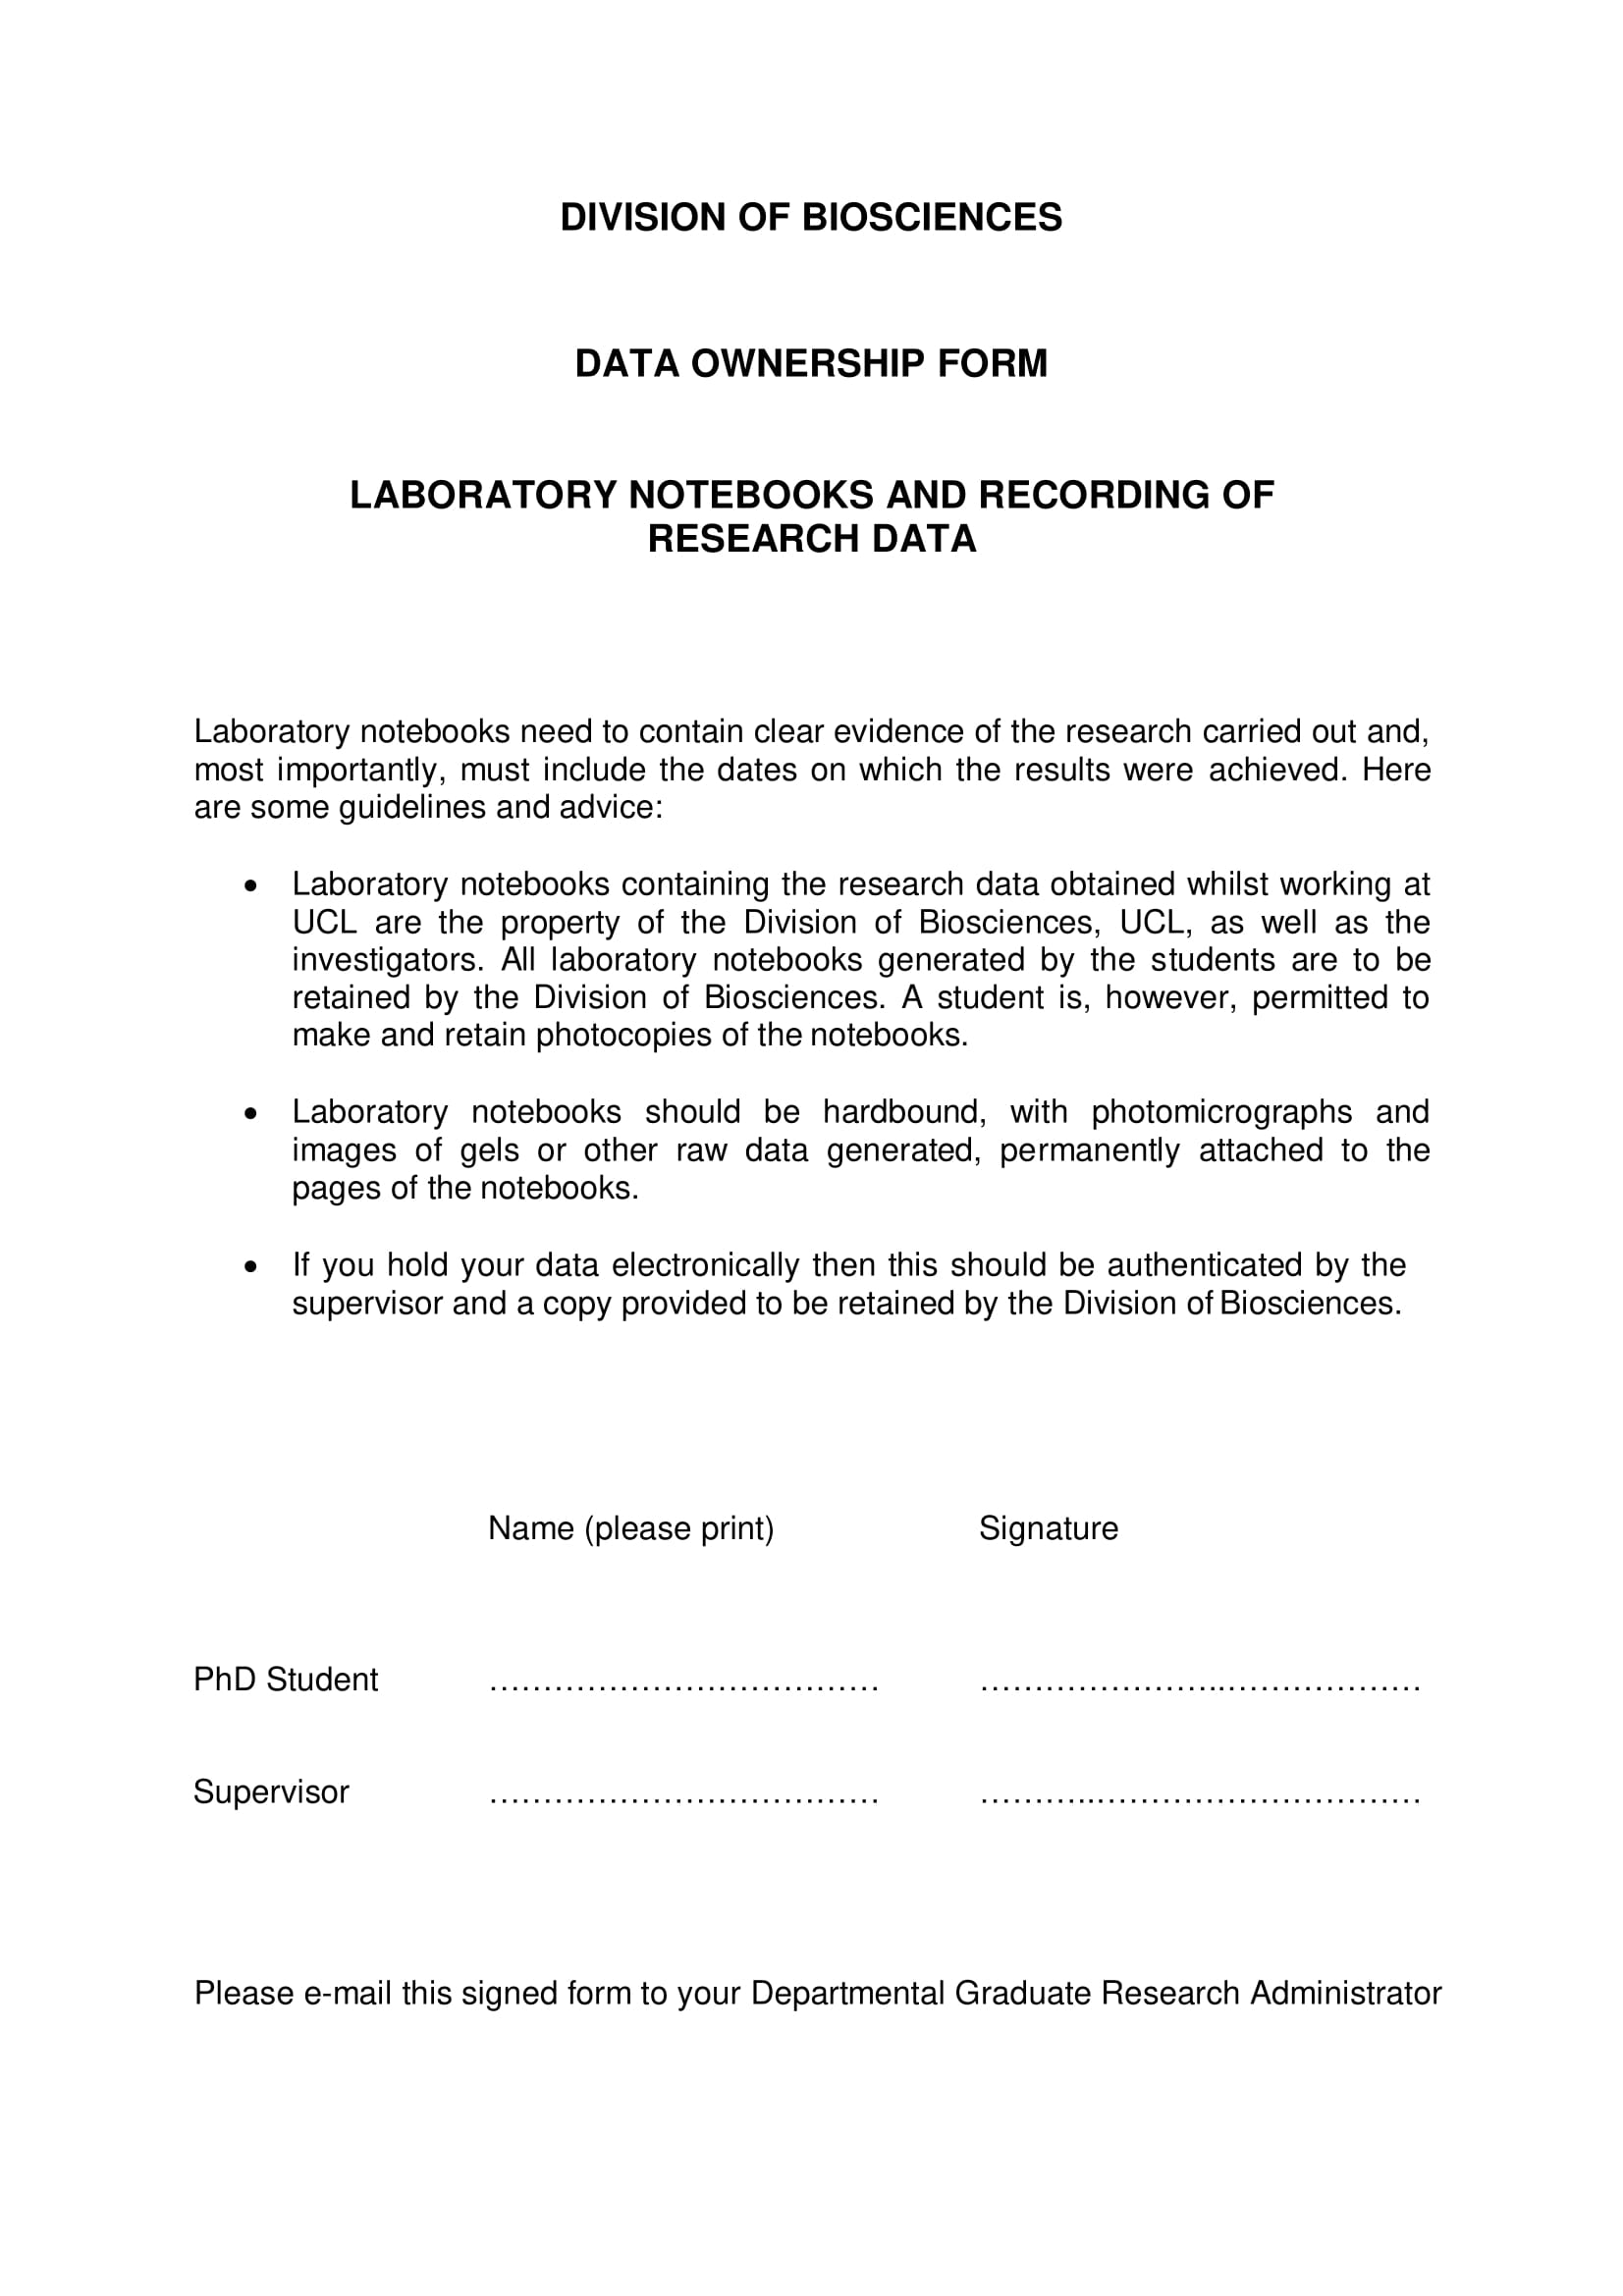 legal data ownership form 1